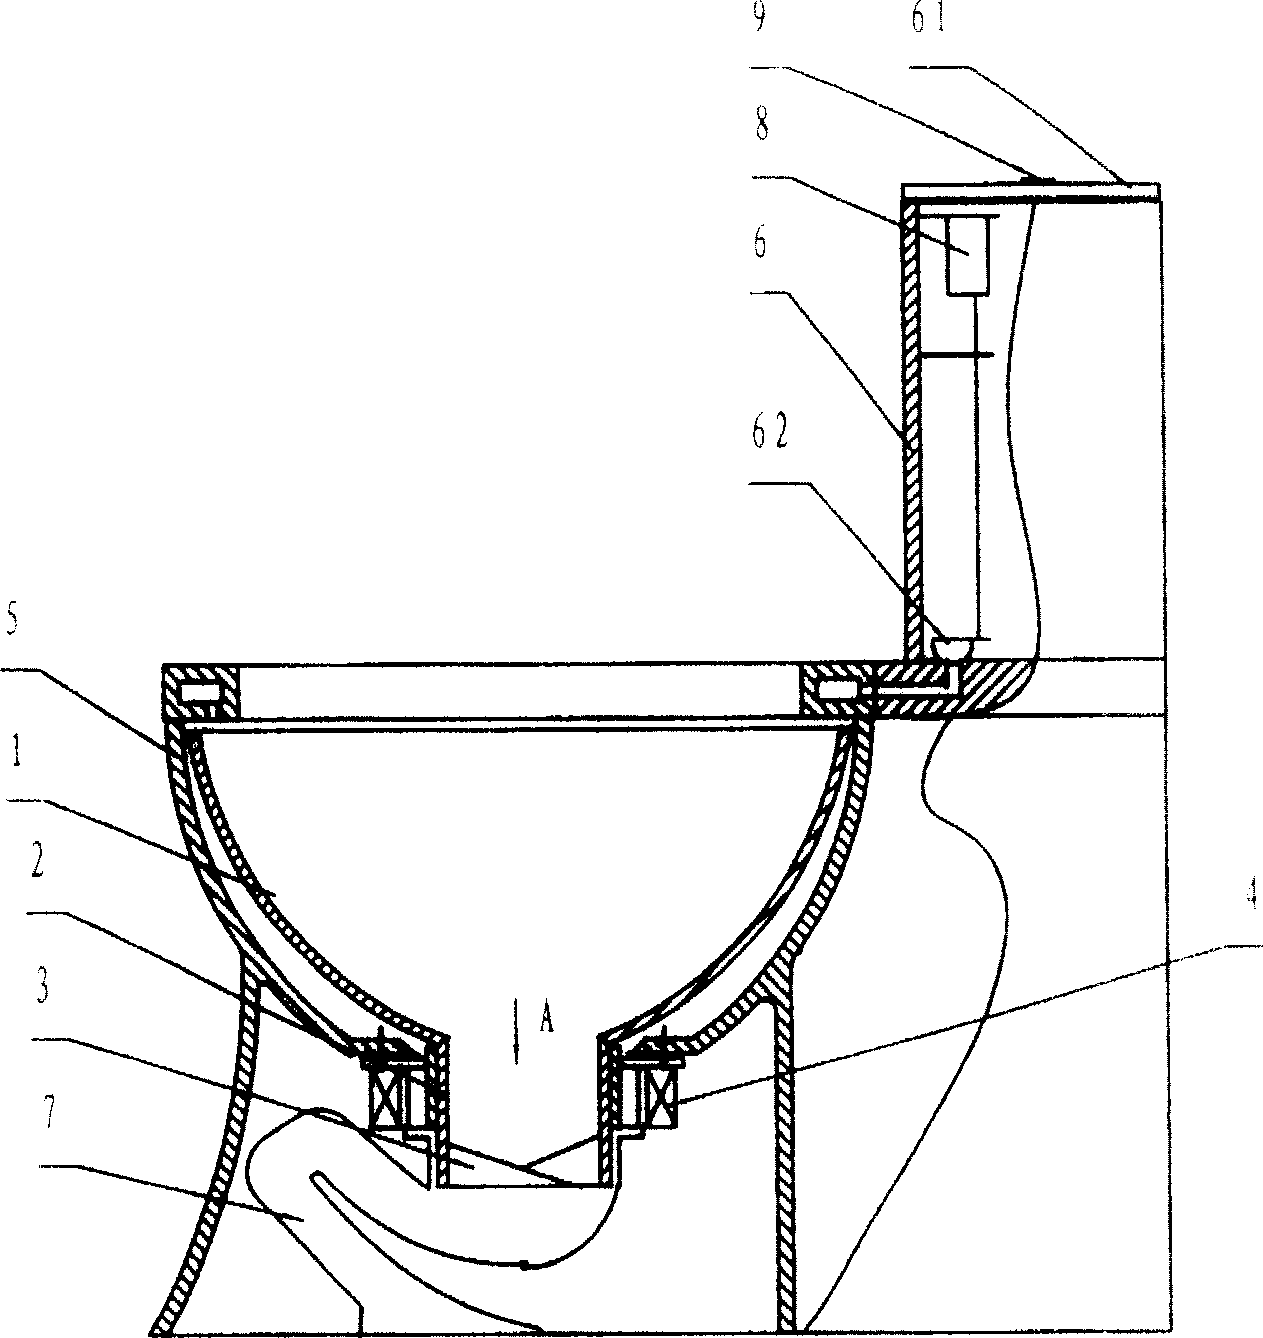 Feces forced drainage device and closet with same